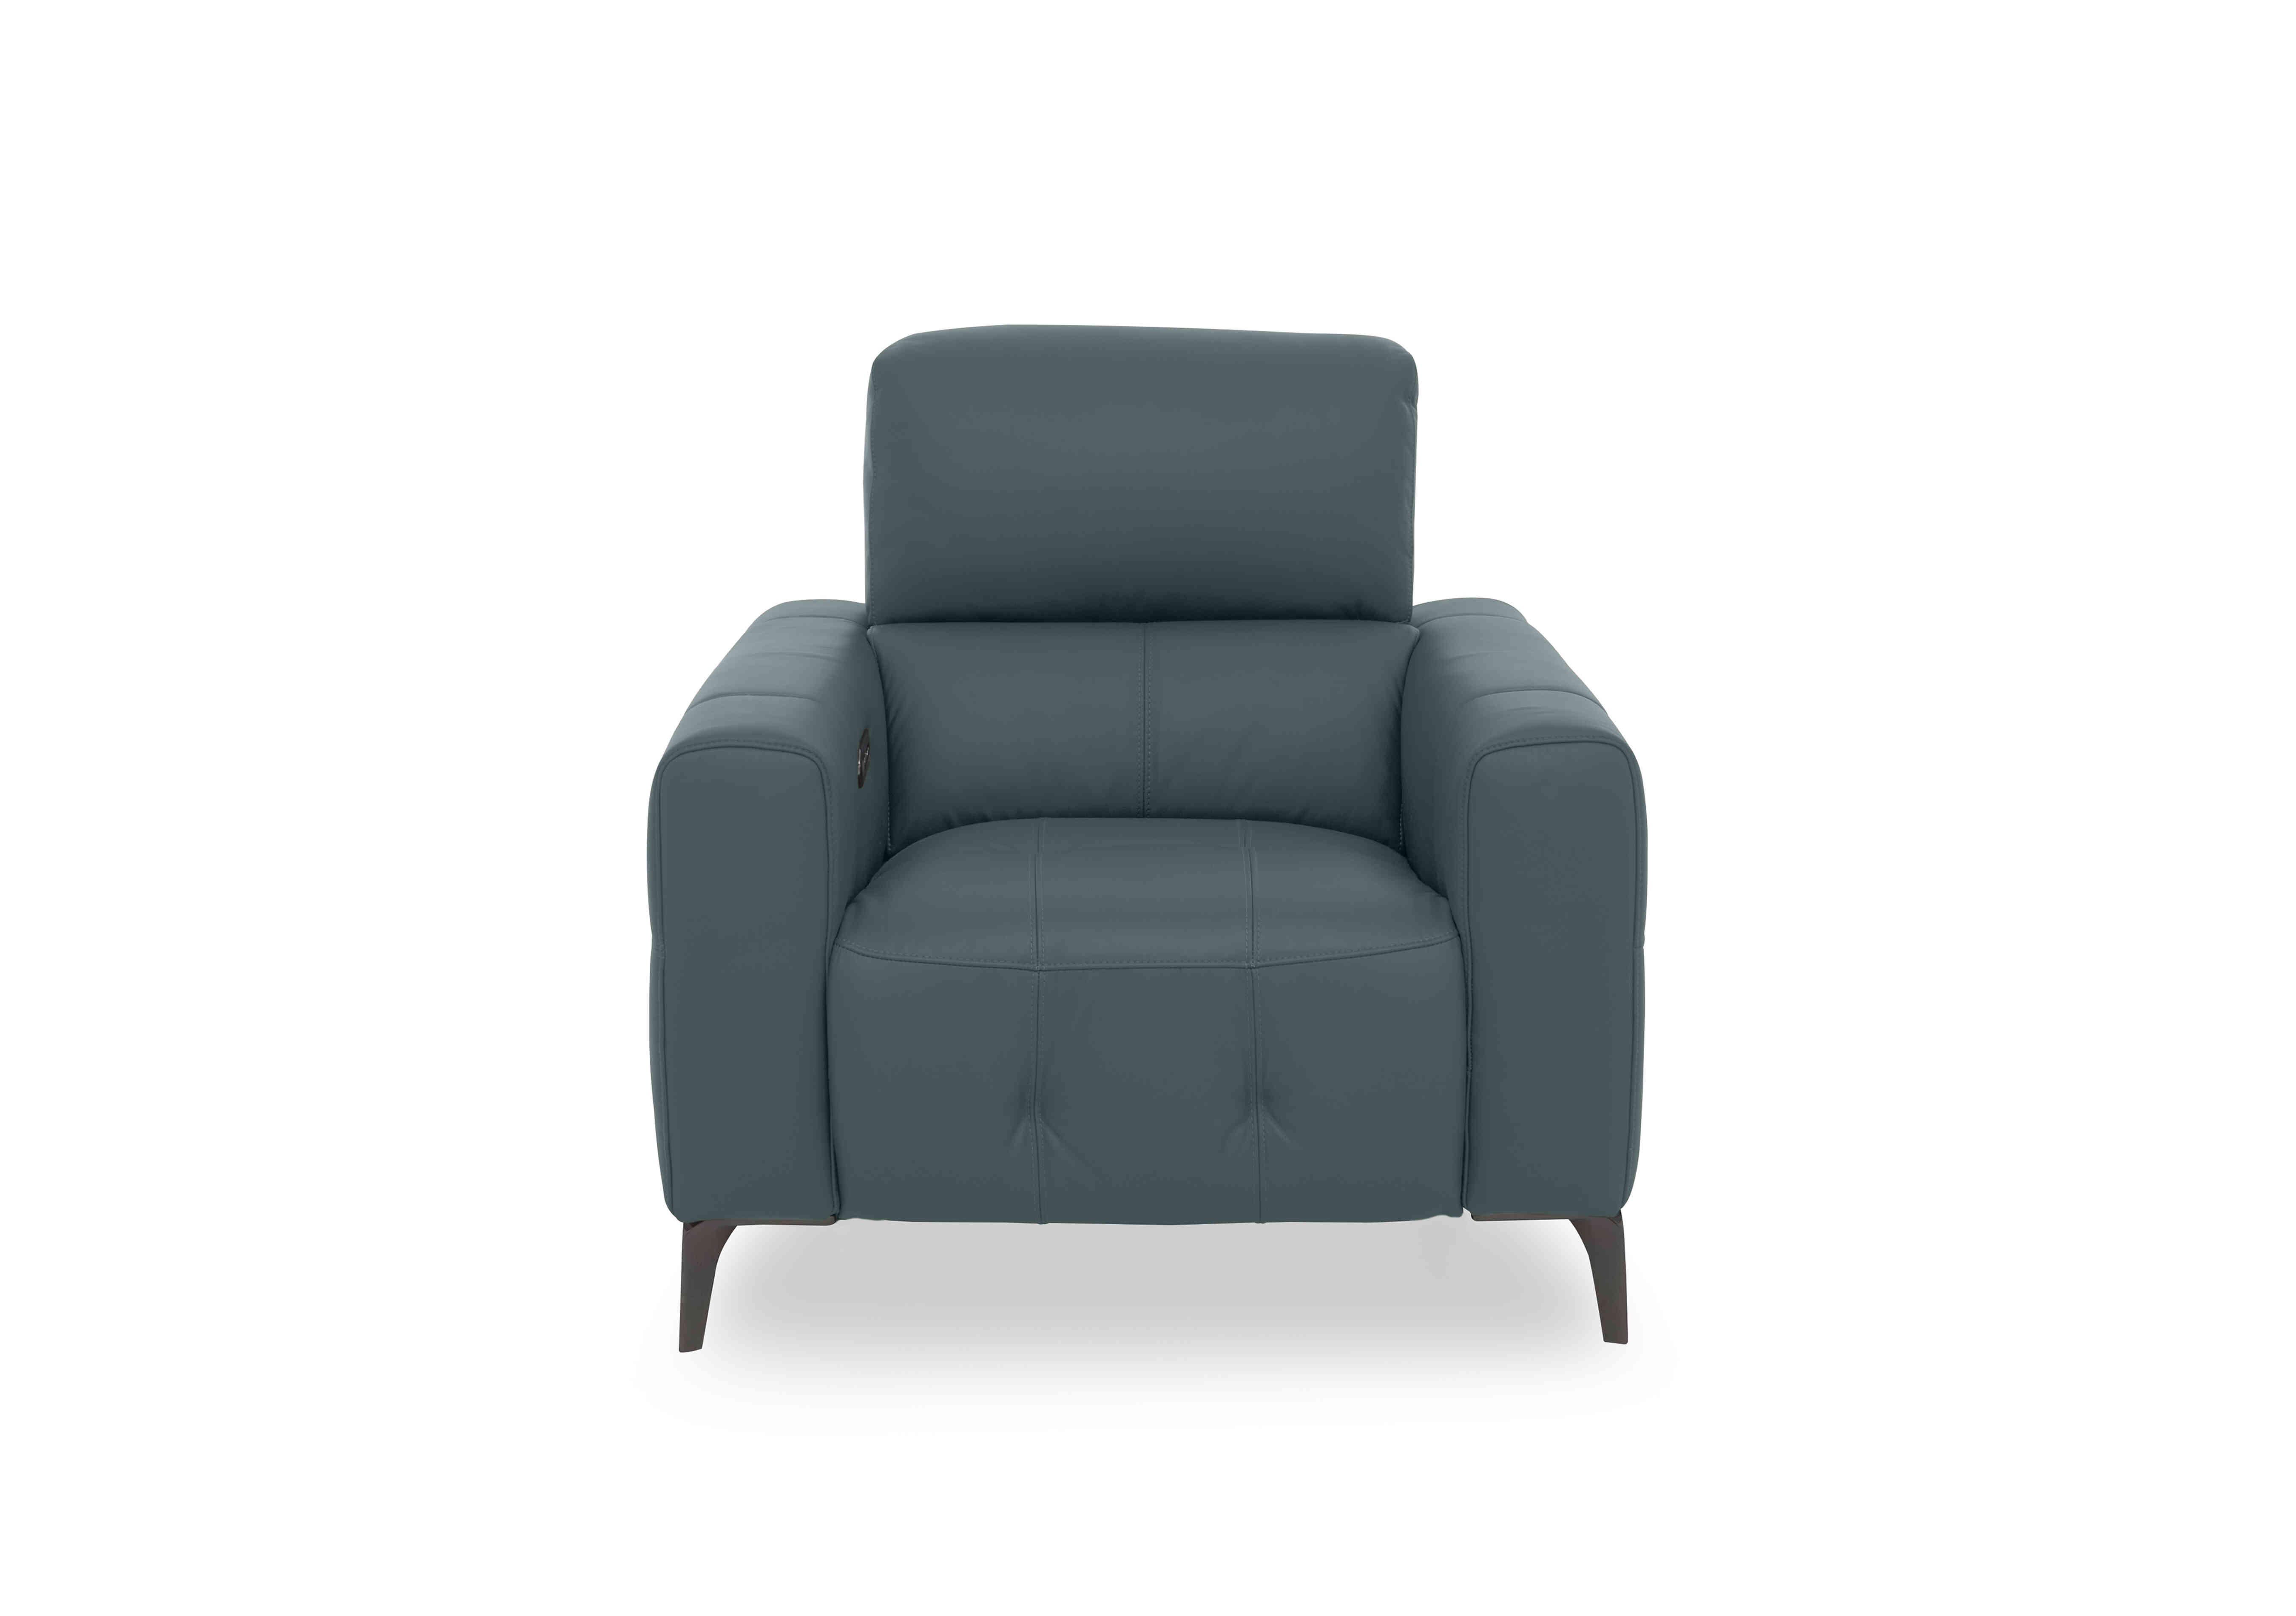 New York Leather Chair in Bv-301e Lake Green on Furniture Village